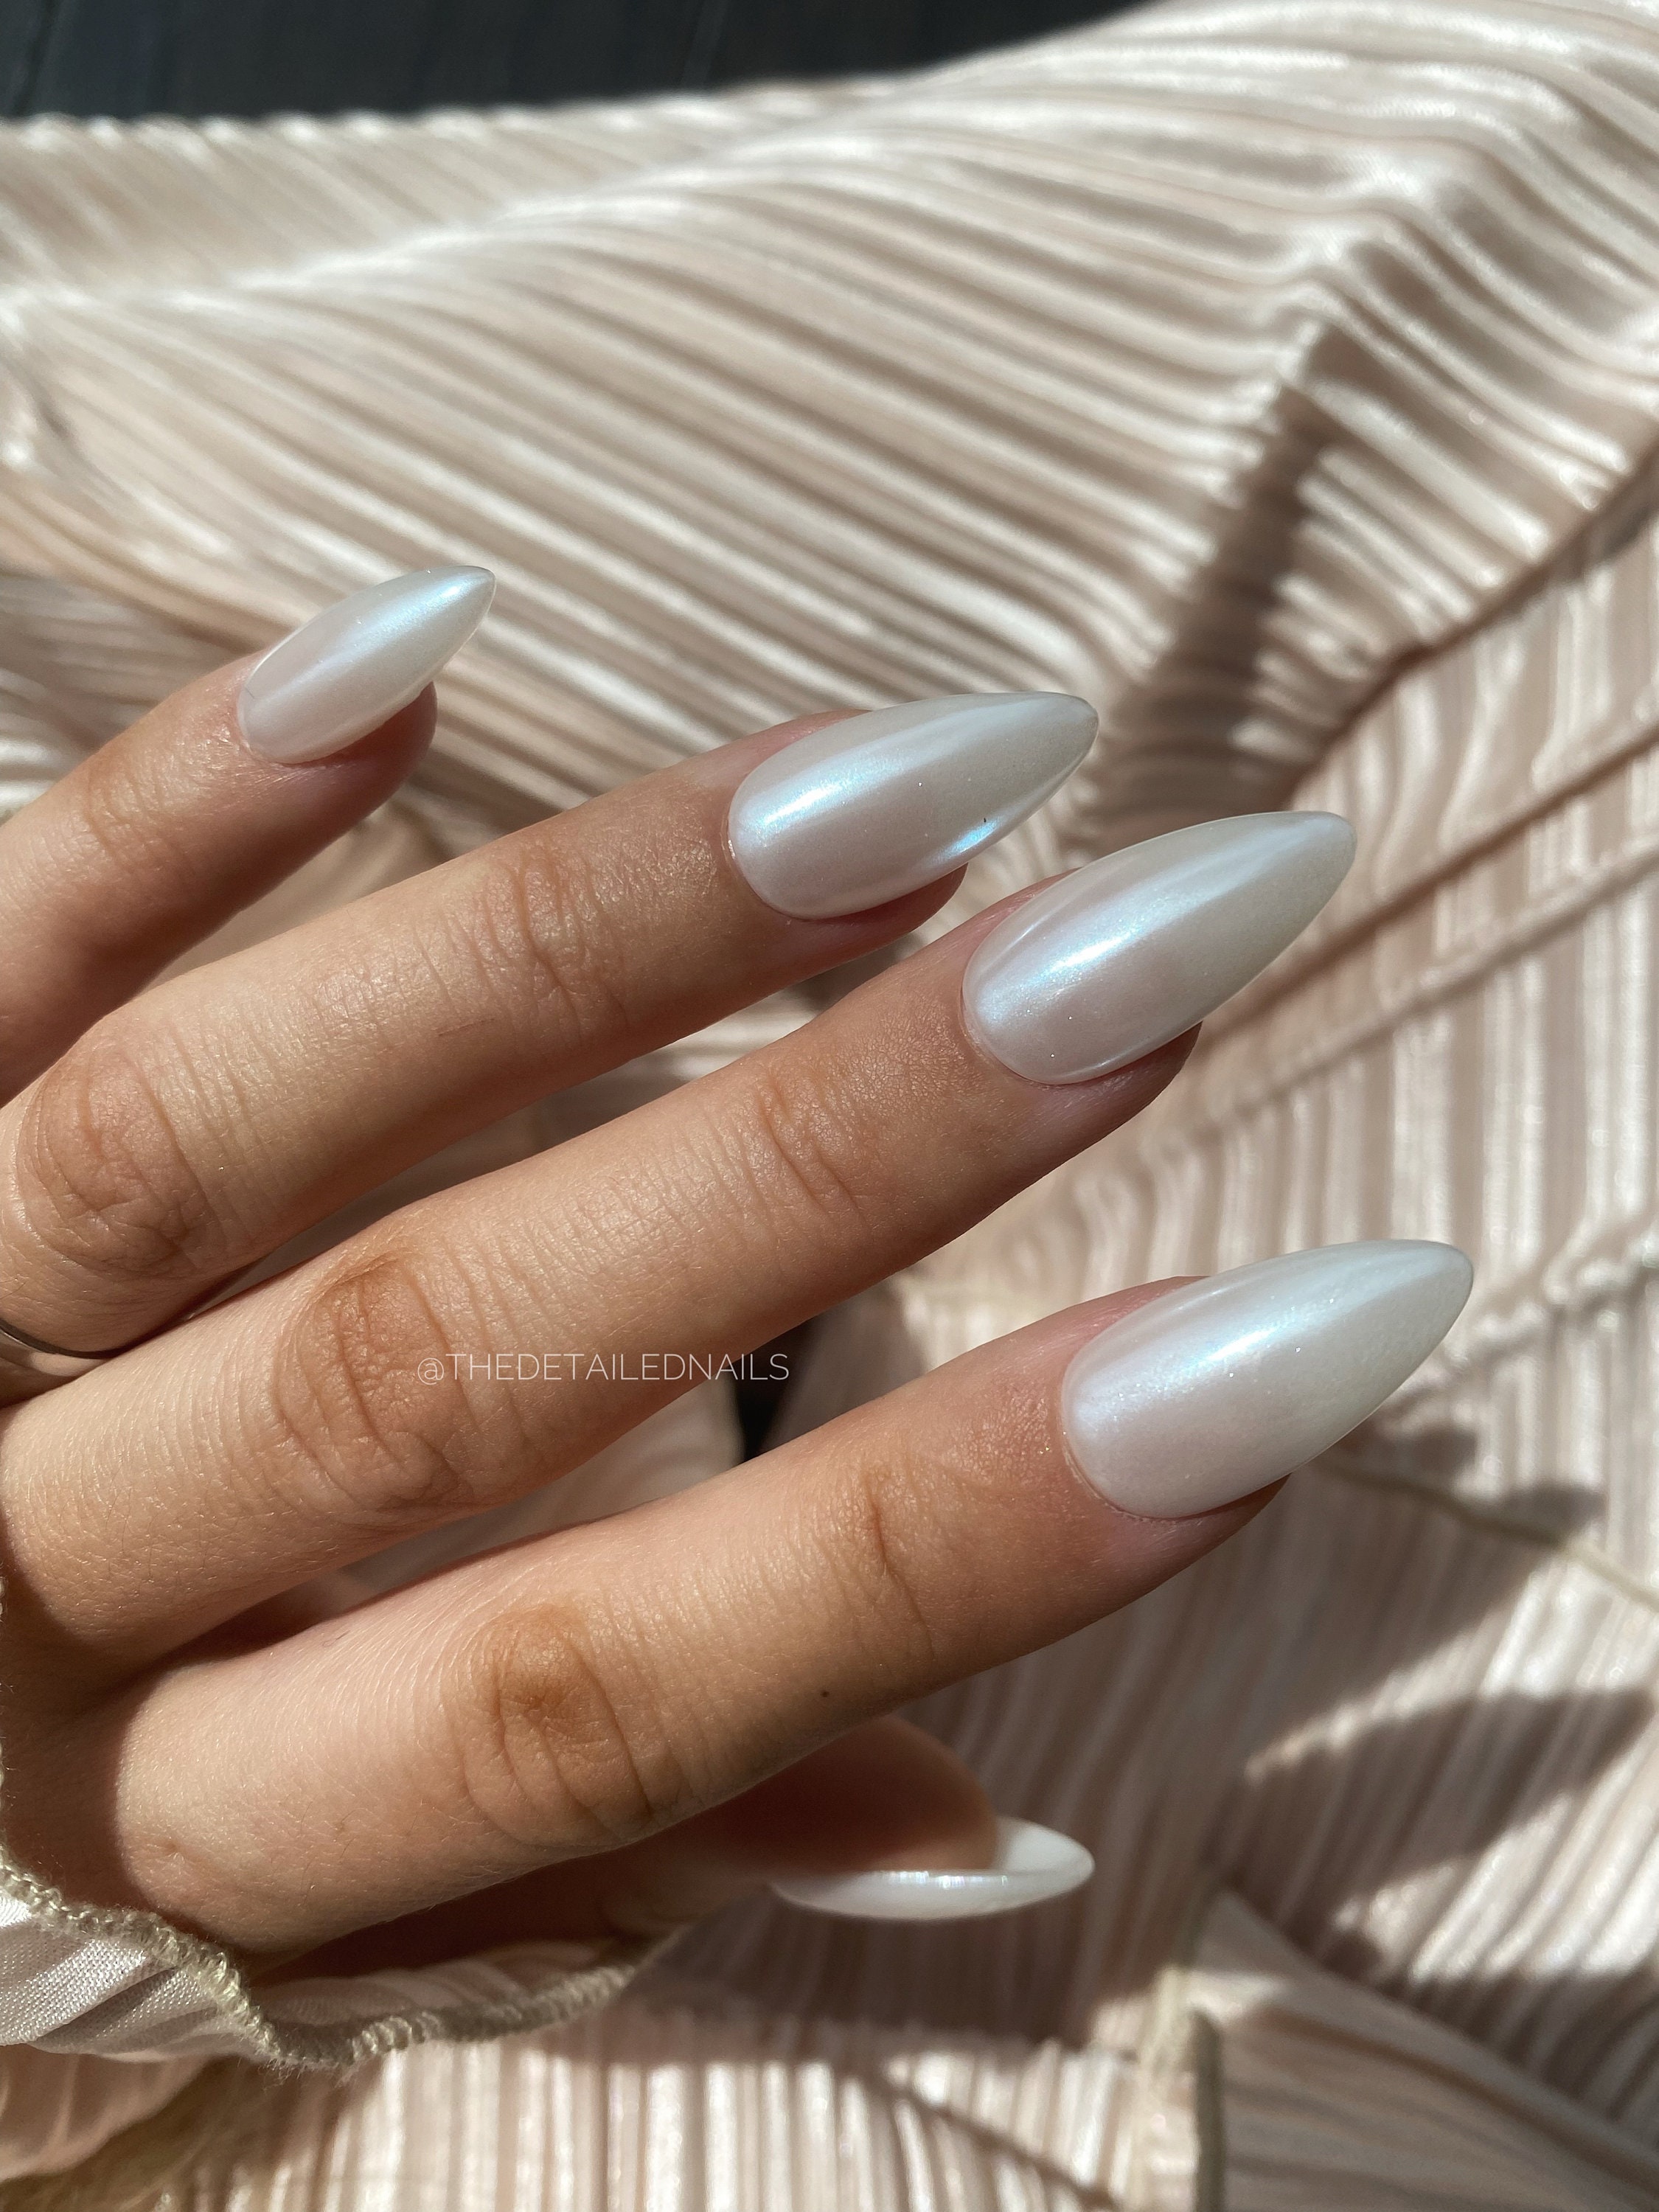 mia :) on Instagram: pearl nails 🤍 finally did the hailey bieber